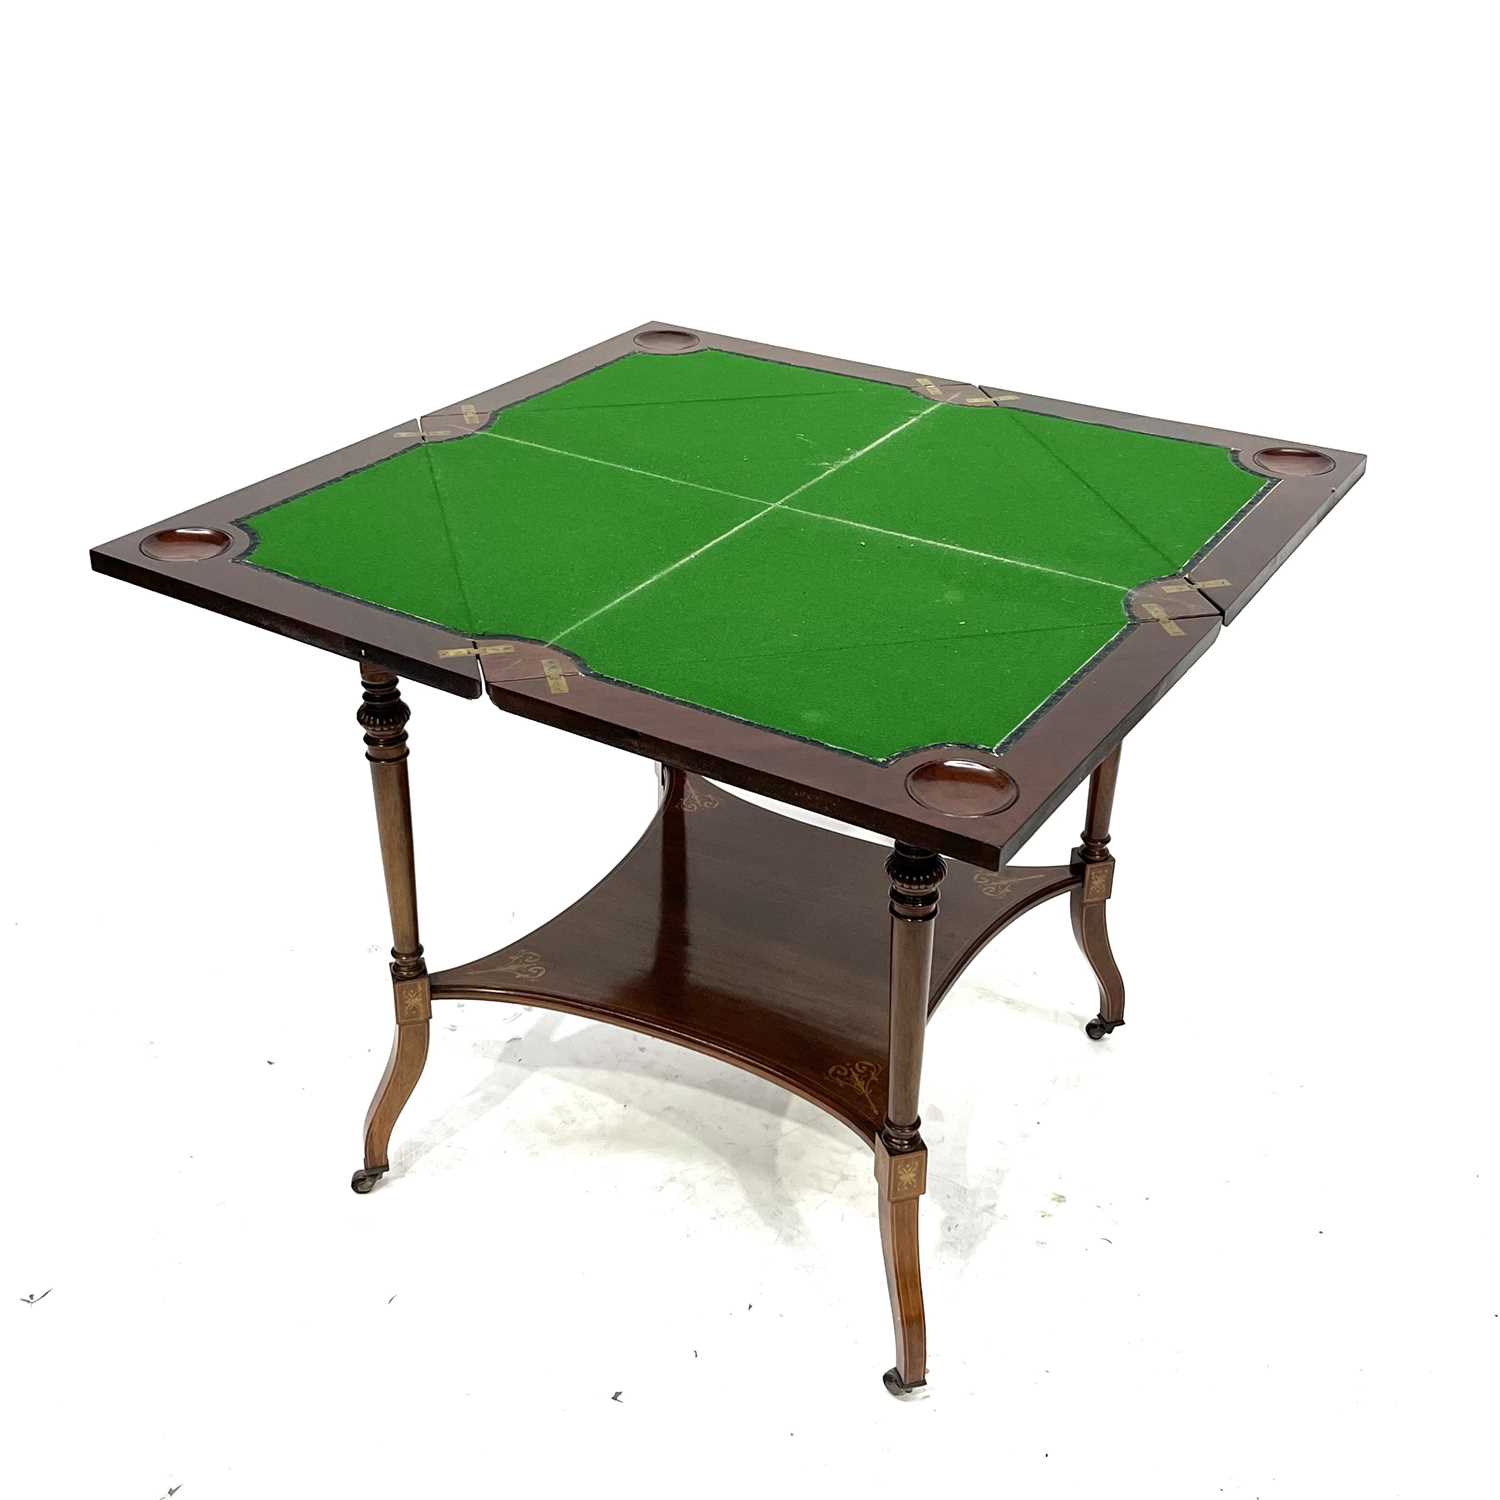 An Edwardian mahogany envelope-action games table, circa 1910, marquetry inlaid, satinwood - Image 2 of 4